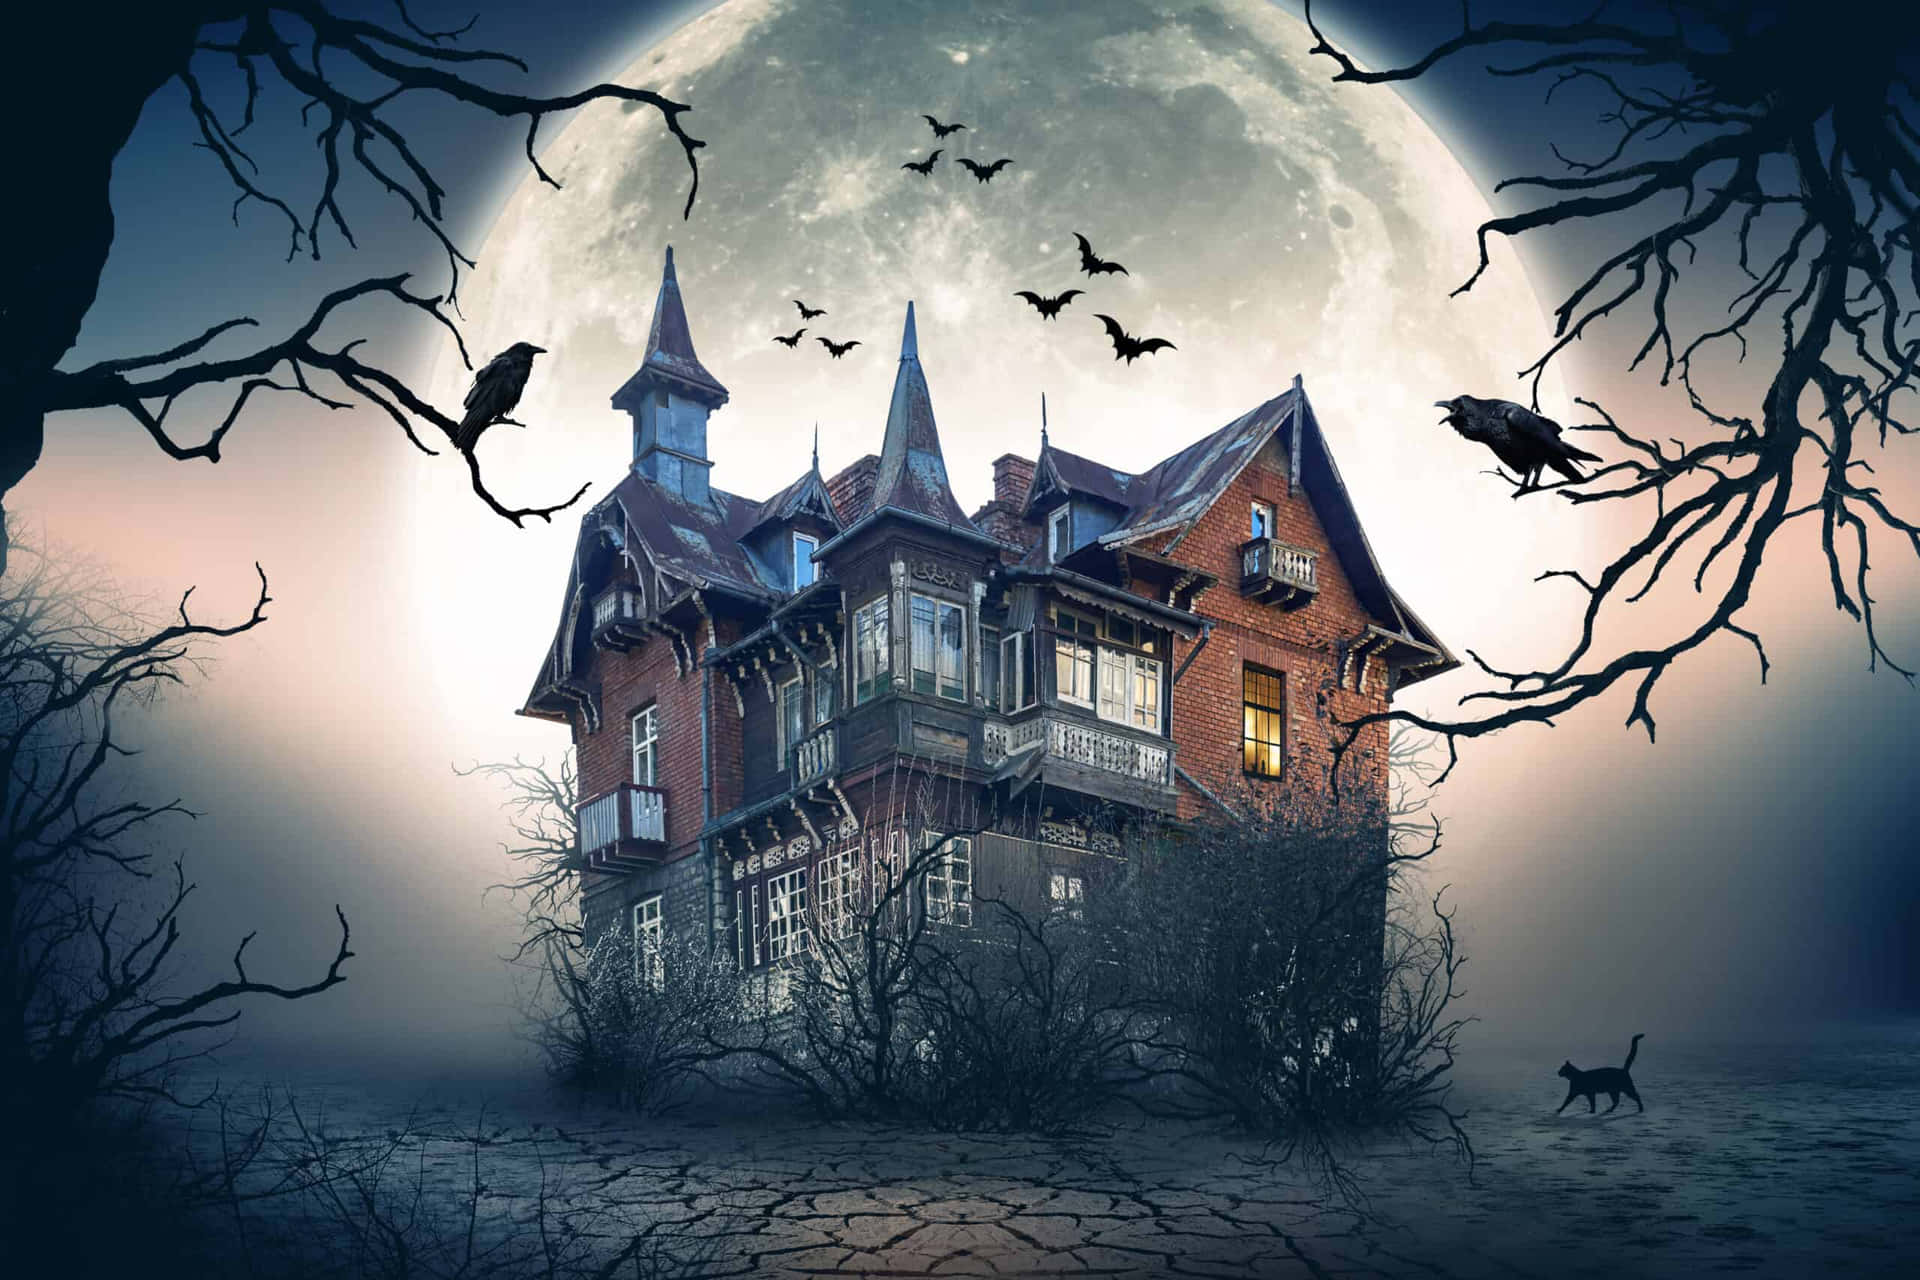 Explore the frightful and mysterious atmosphere of this Haunted House.